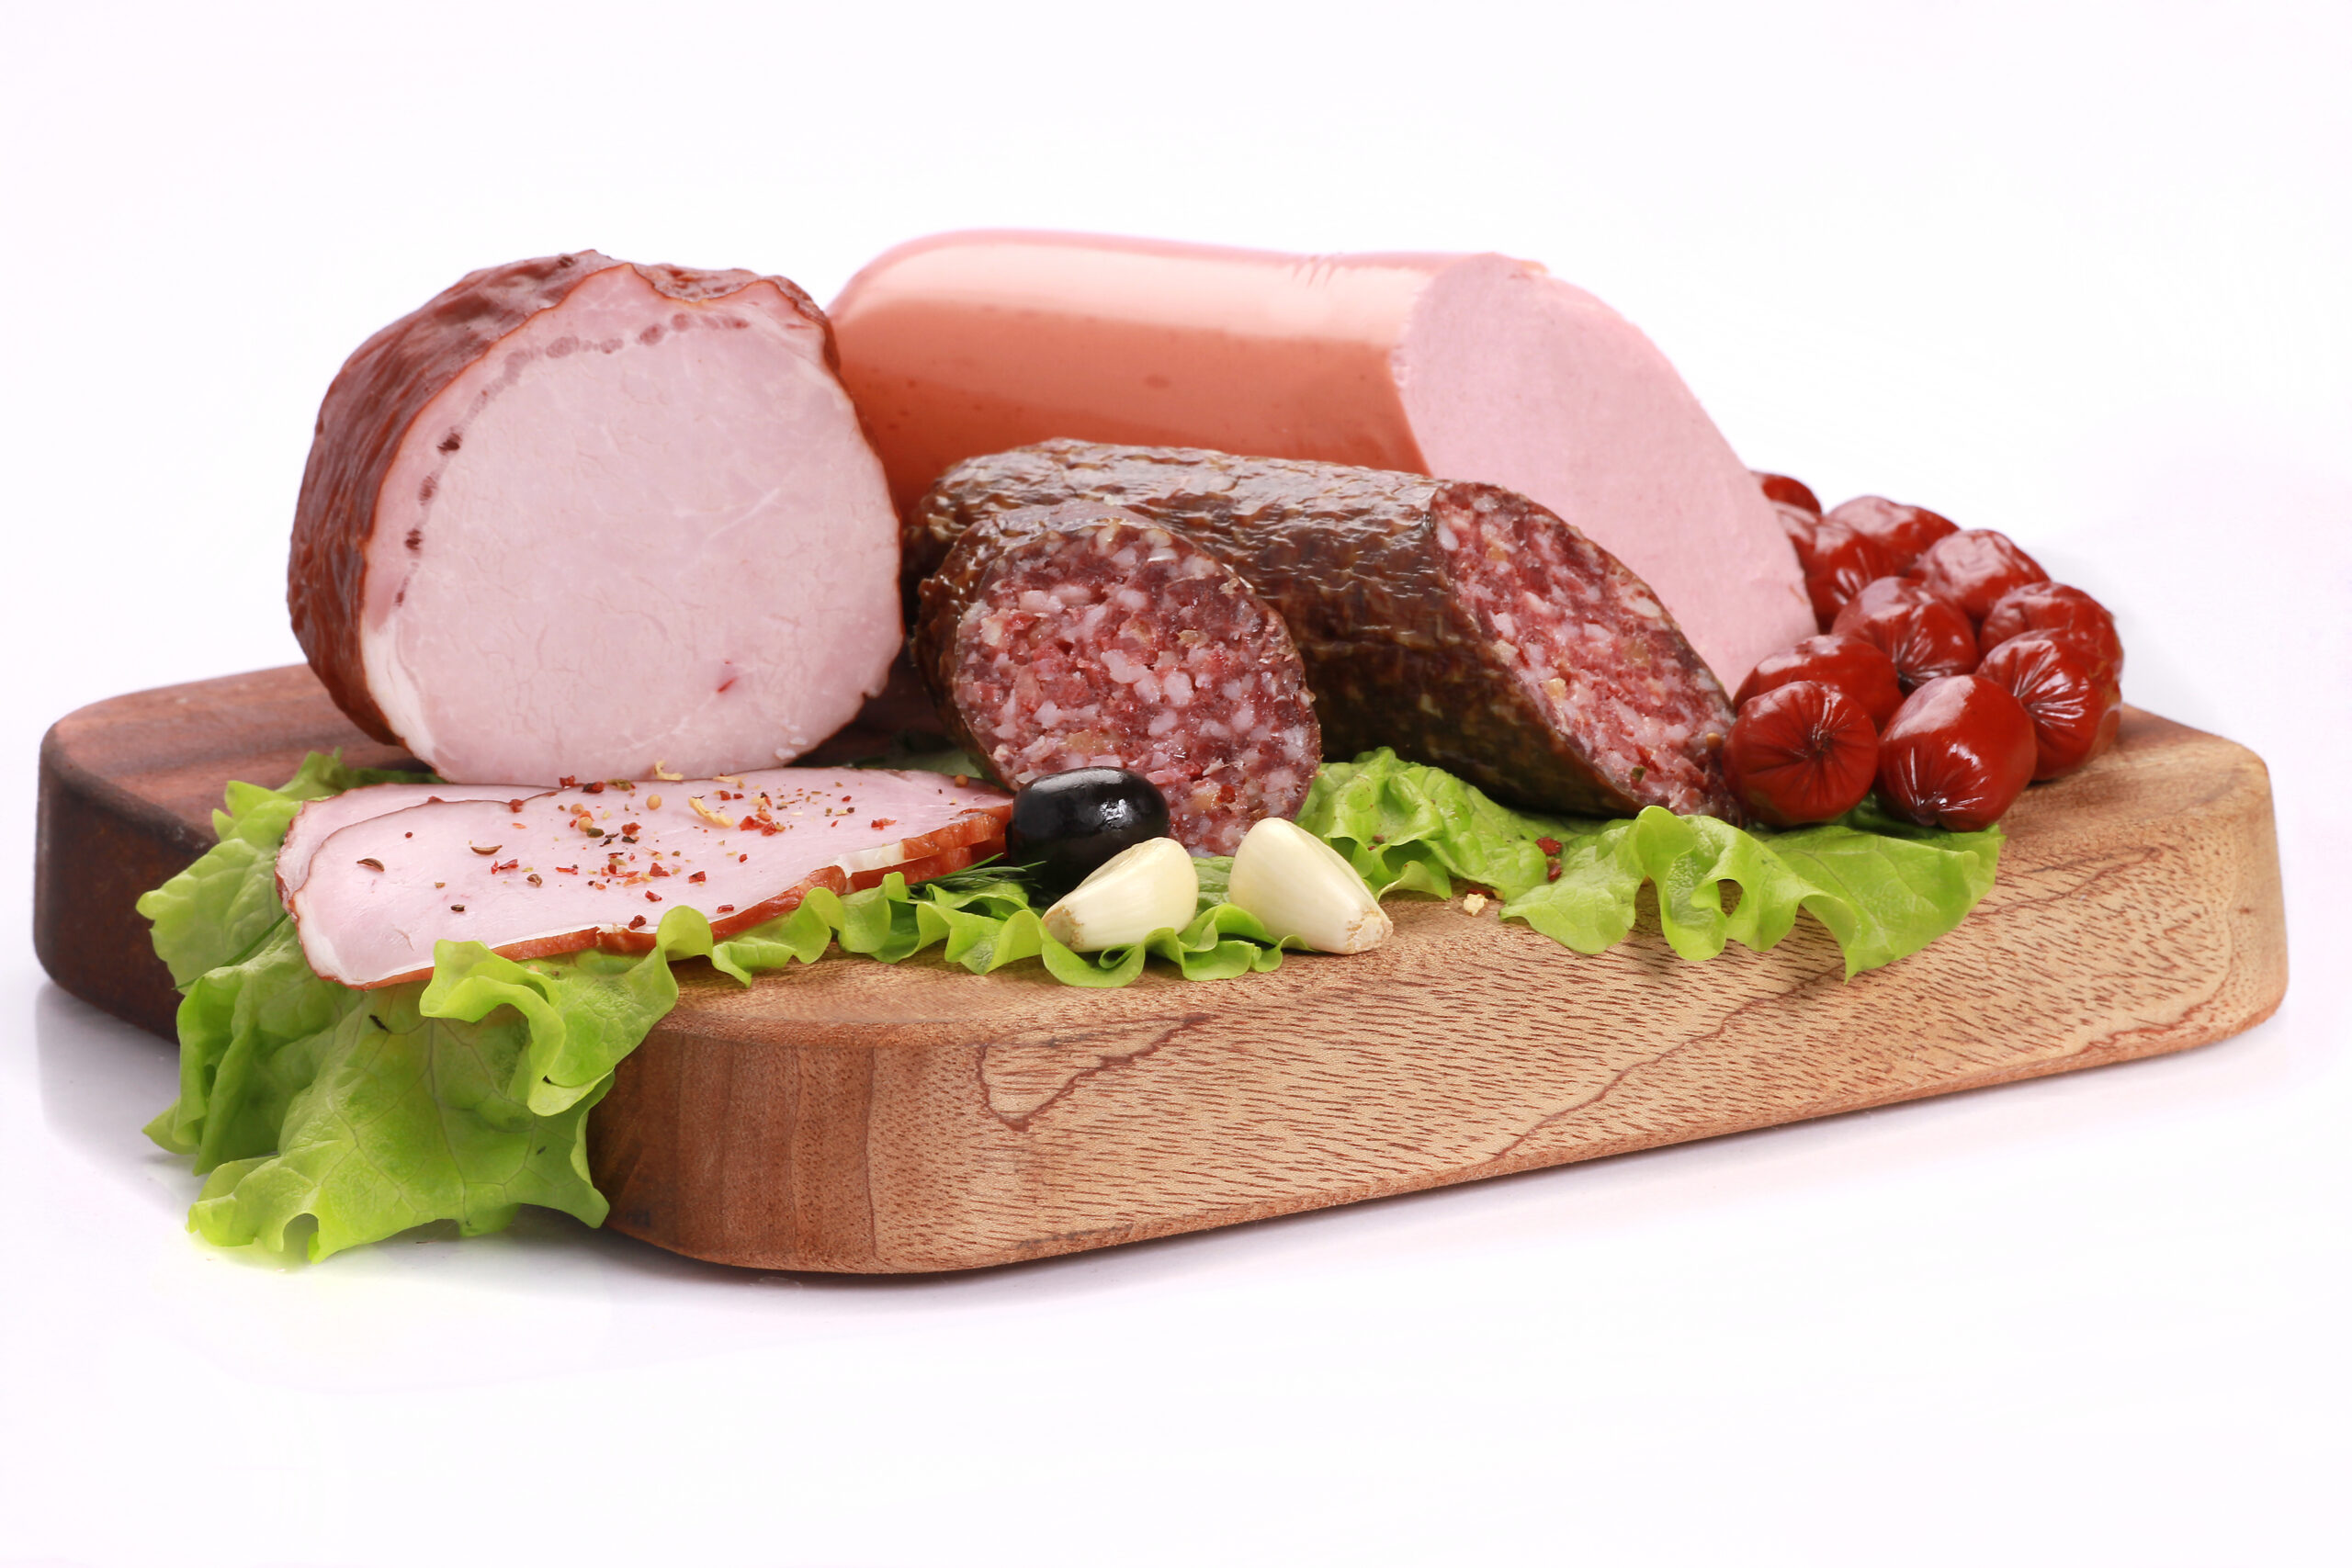 Closeup shot of slices of sausages with green lettuce on a wooden board